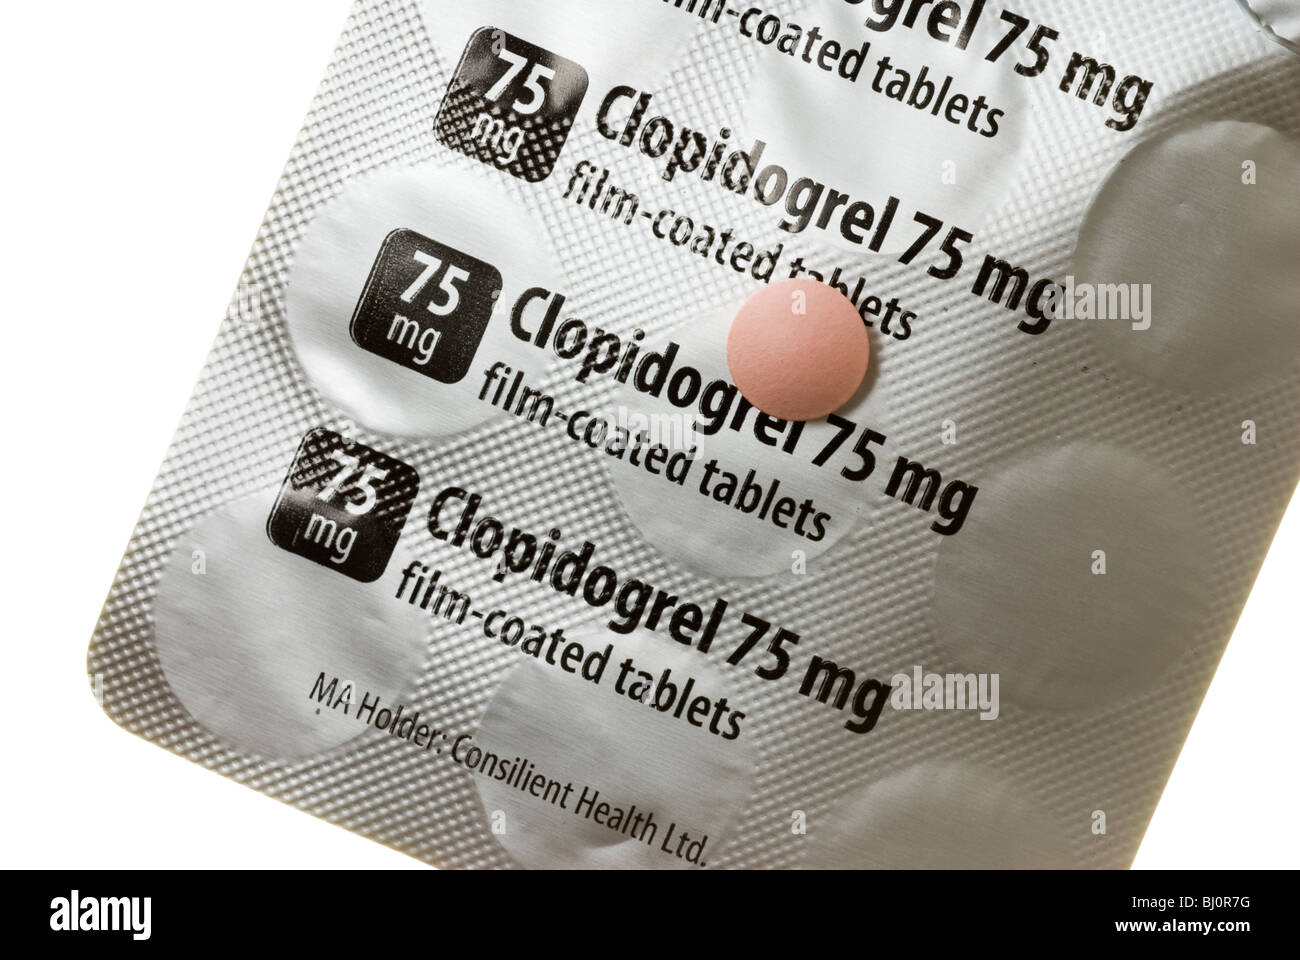 can you drink alcohol with clopidogrel